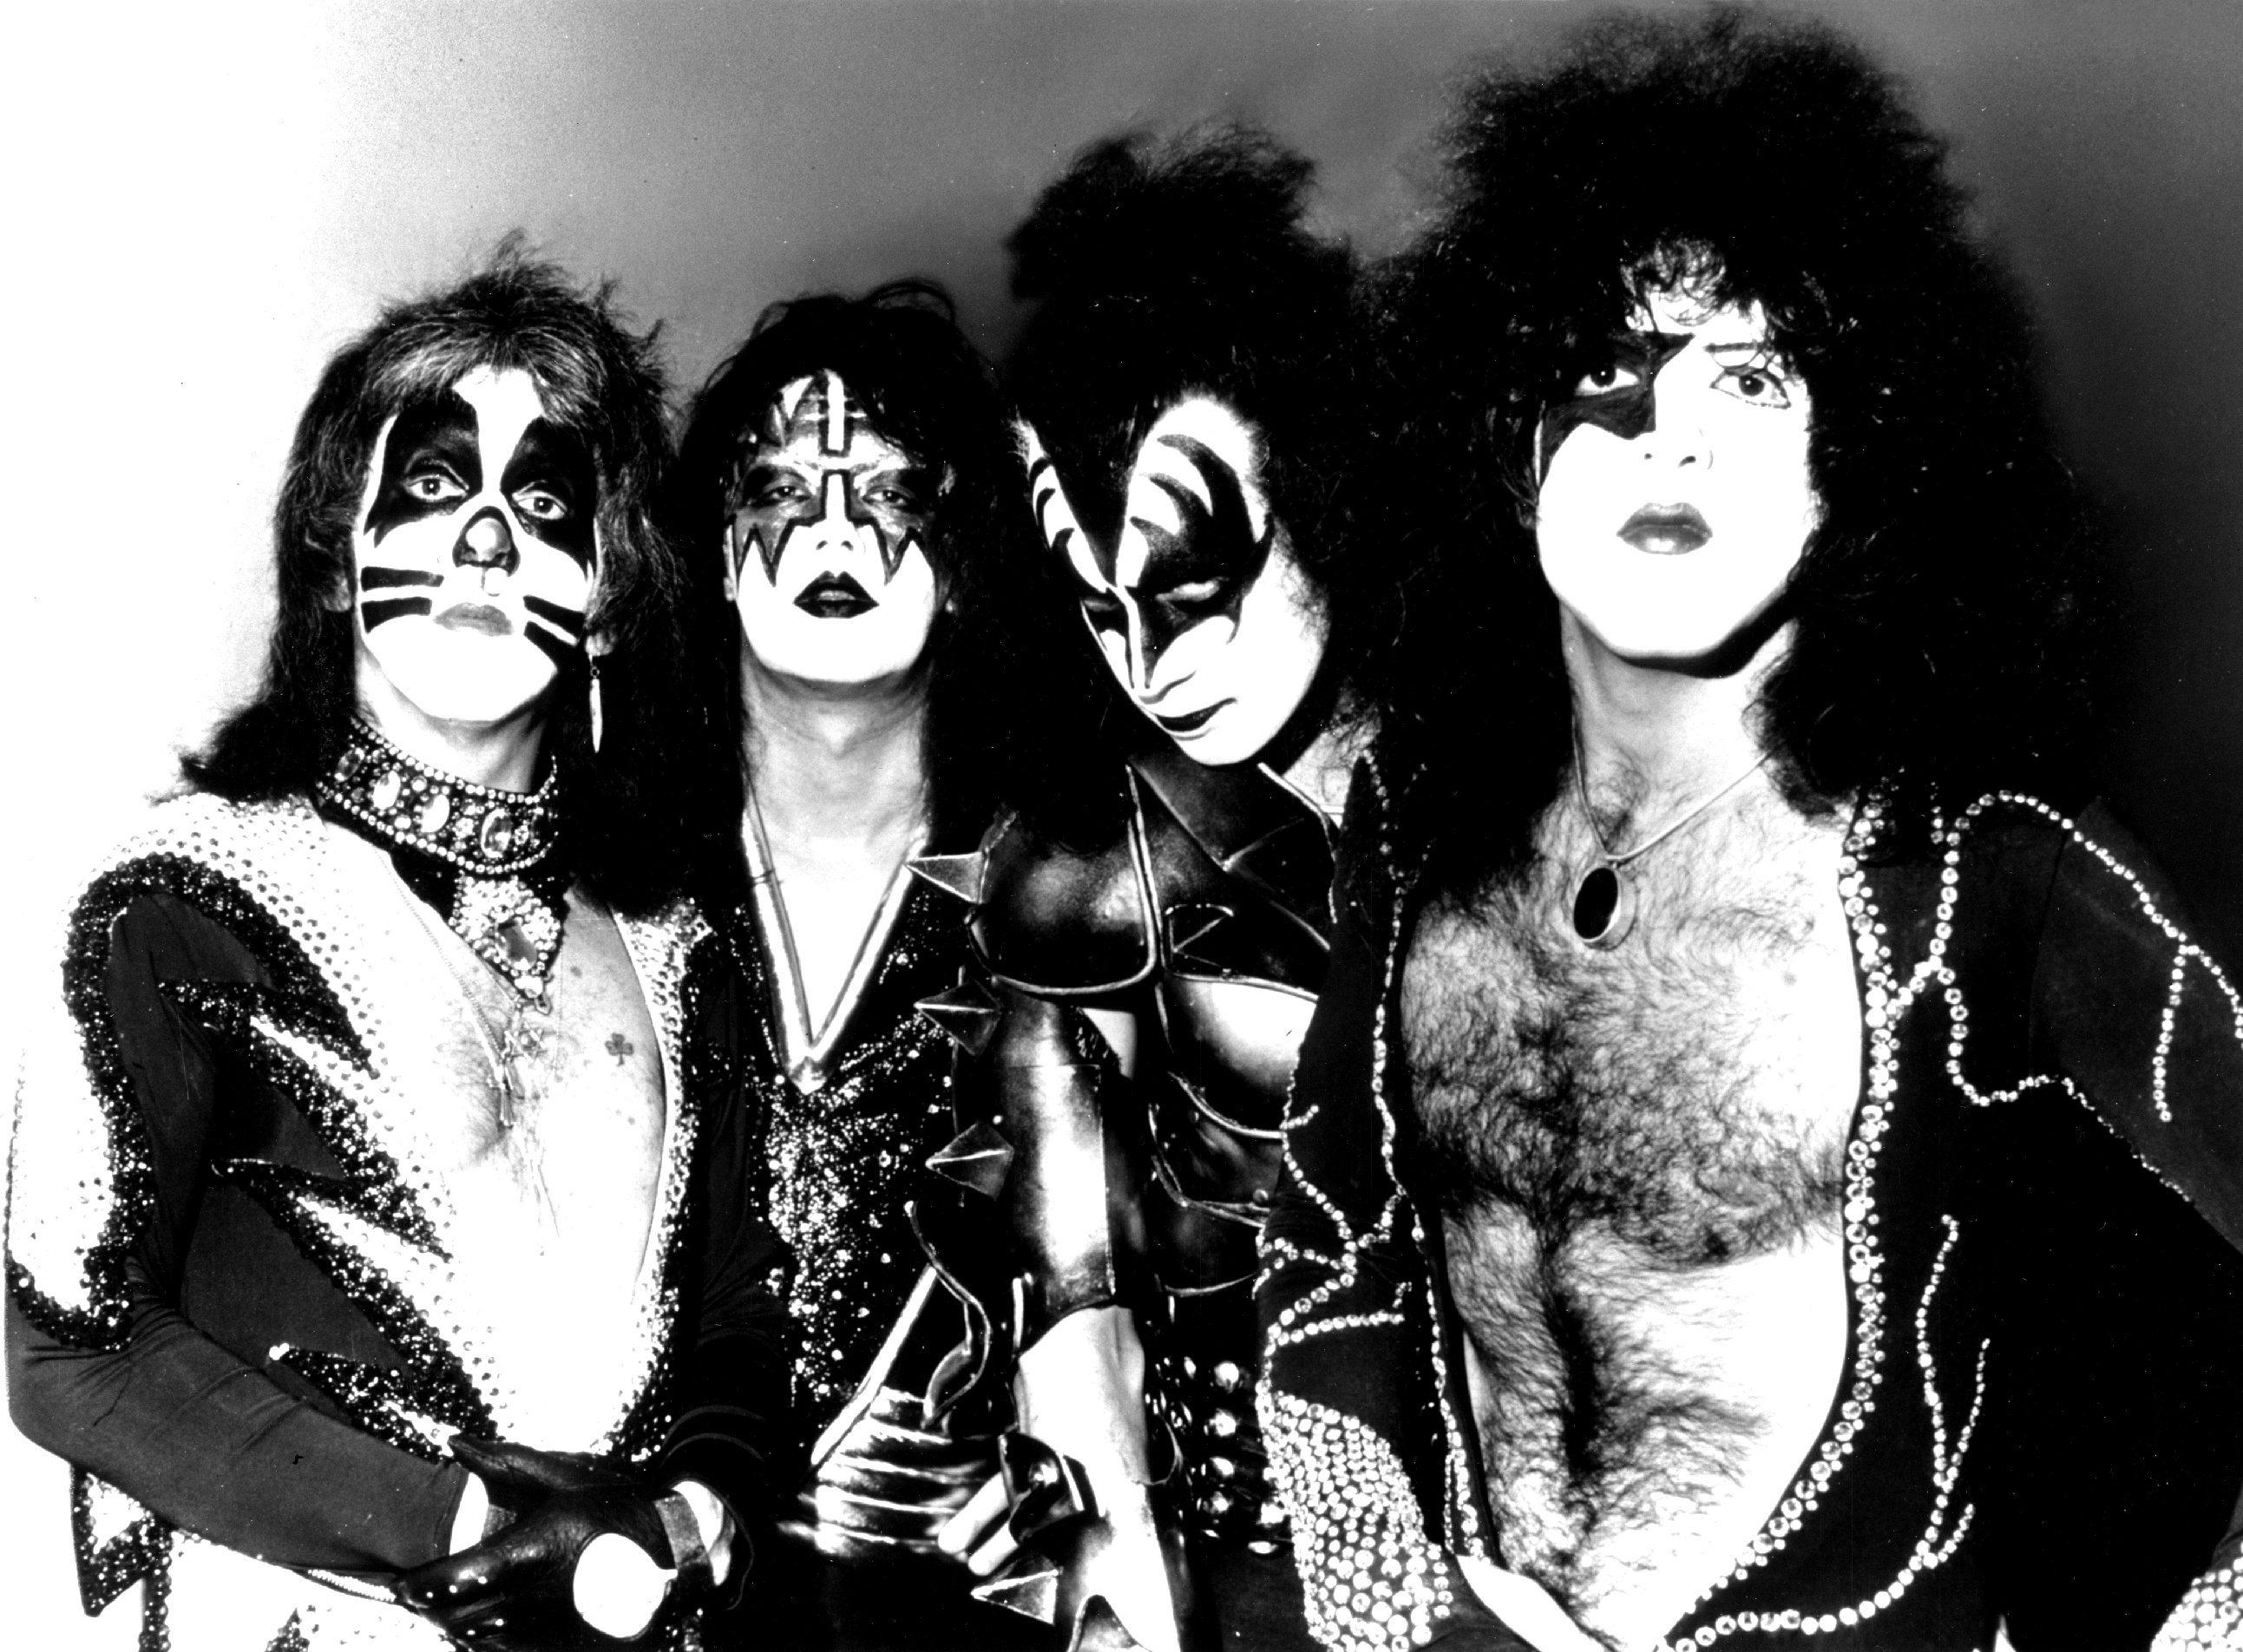 The members of Kiss in their makeup